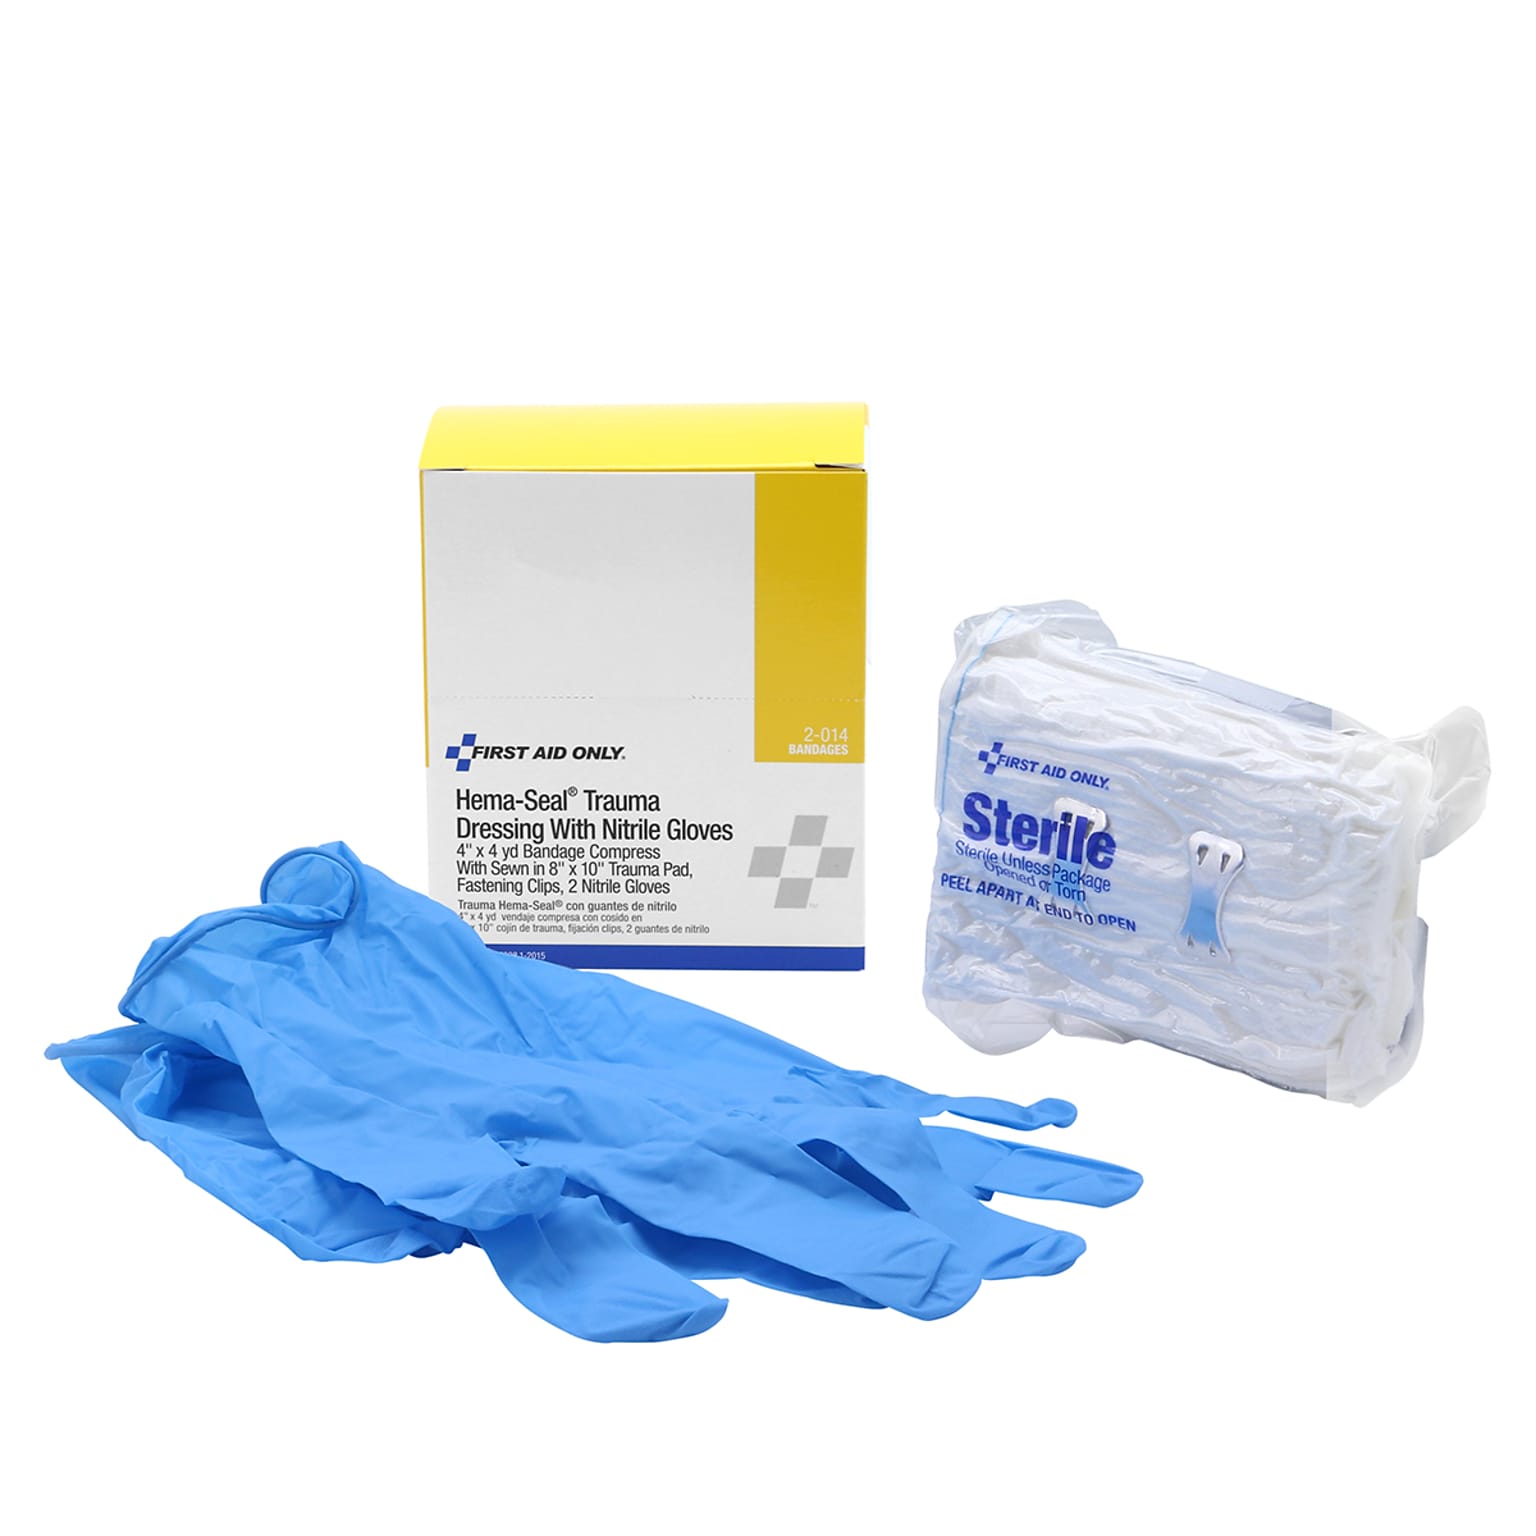 First Aid Only Hema-Seal 4" Trauma Dressing Refill with Nitrile Gloves  (2-014) | Quill.com